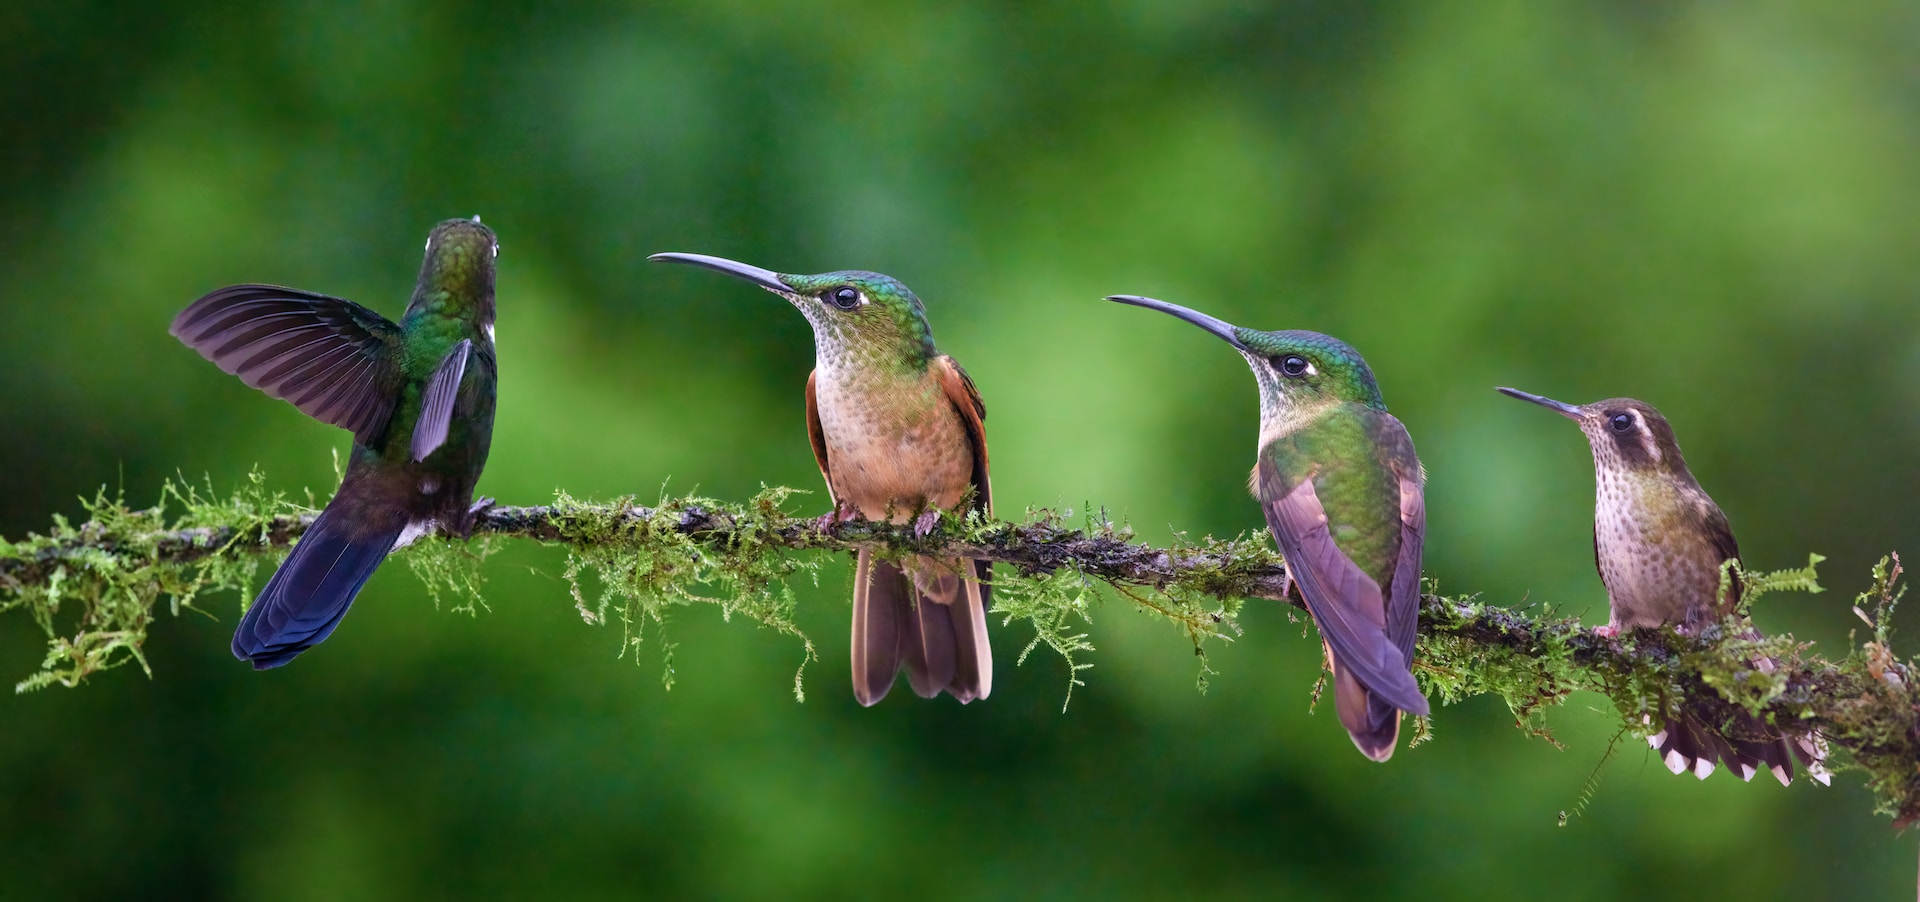 What is a group of hummingbirds called